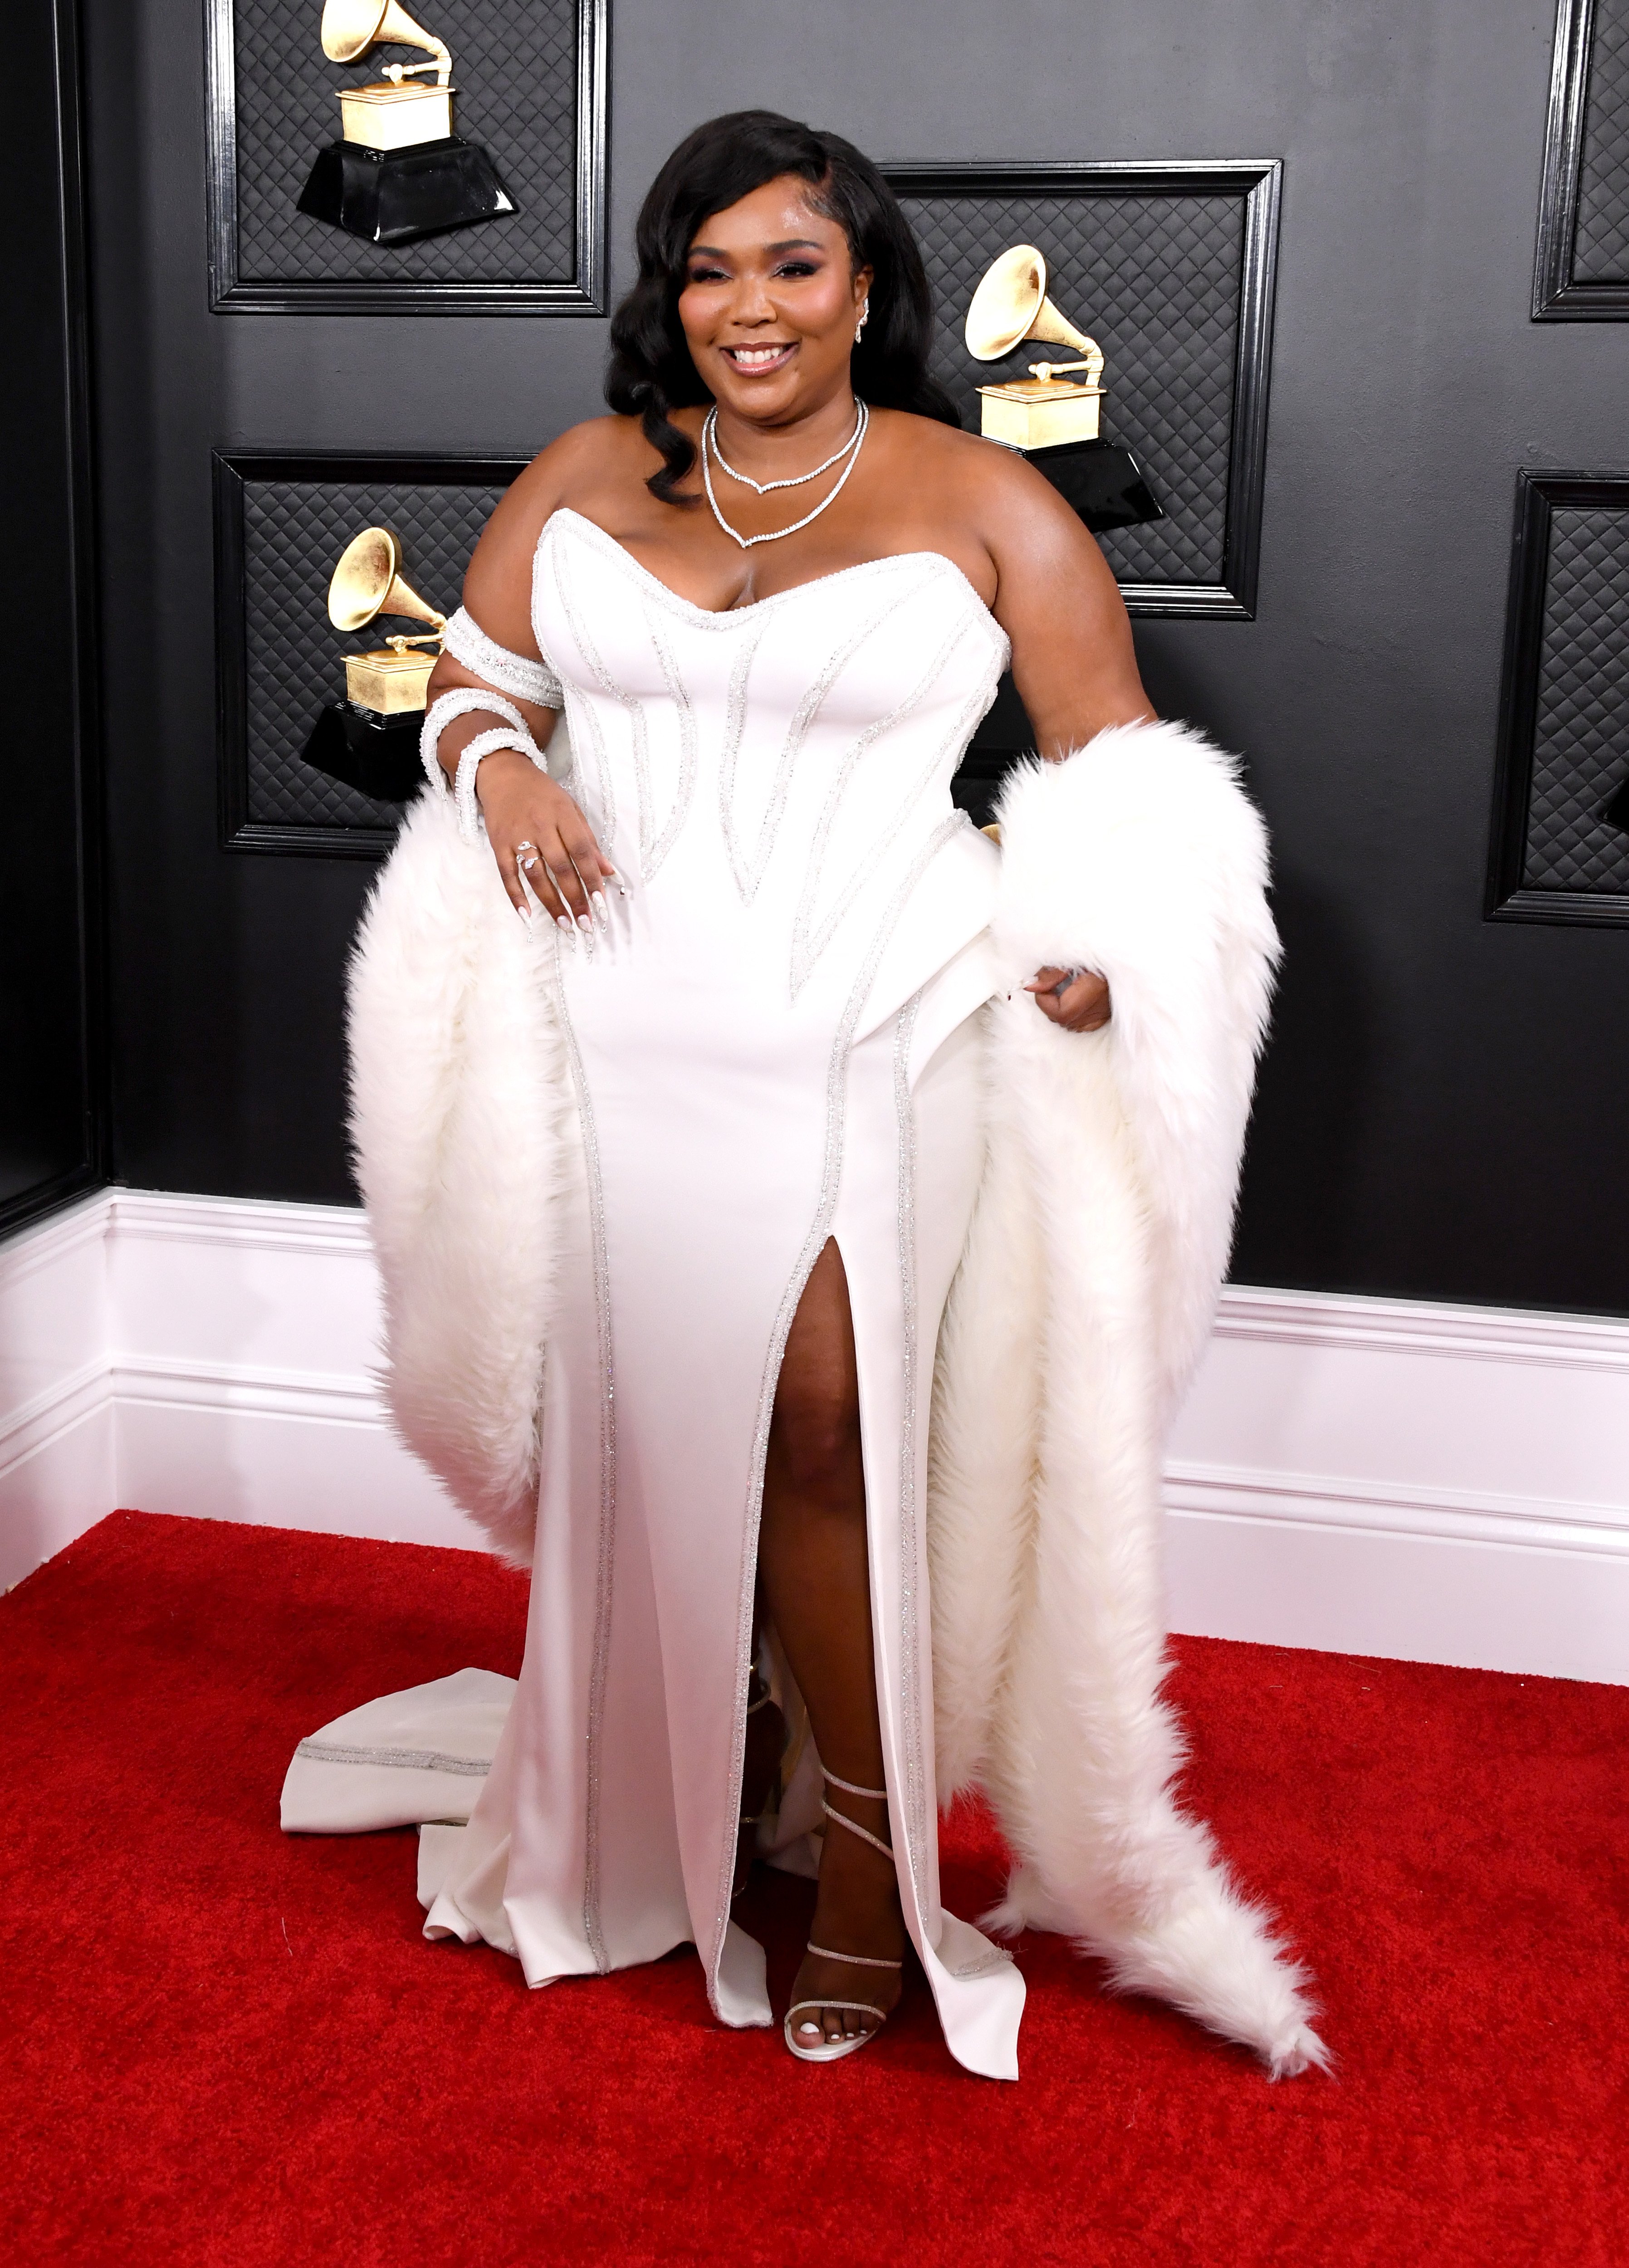 Lizzo attends the 62nd Annual GRAMMY Awards at Staples Center on January 26, 2020 in Los Angeles, California. | Source: Getty Images